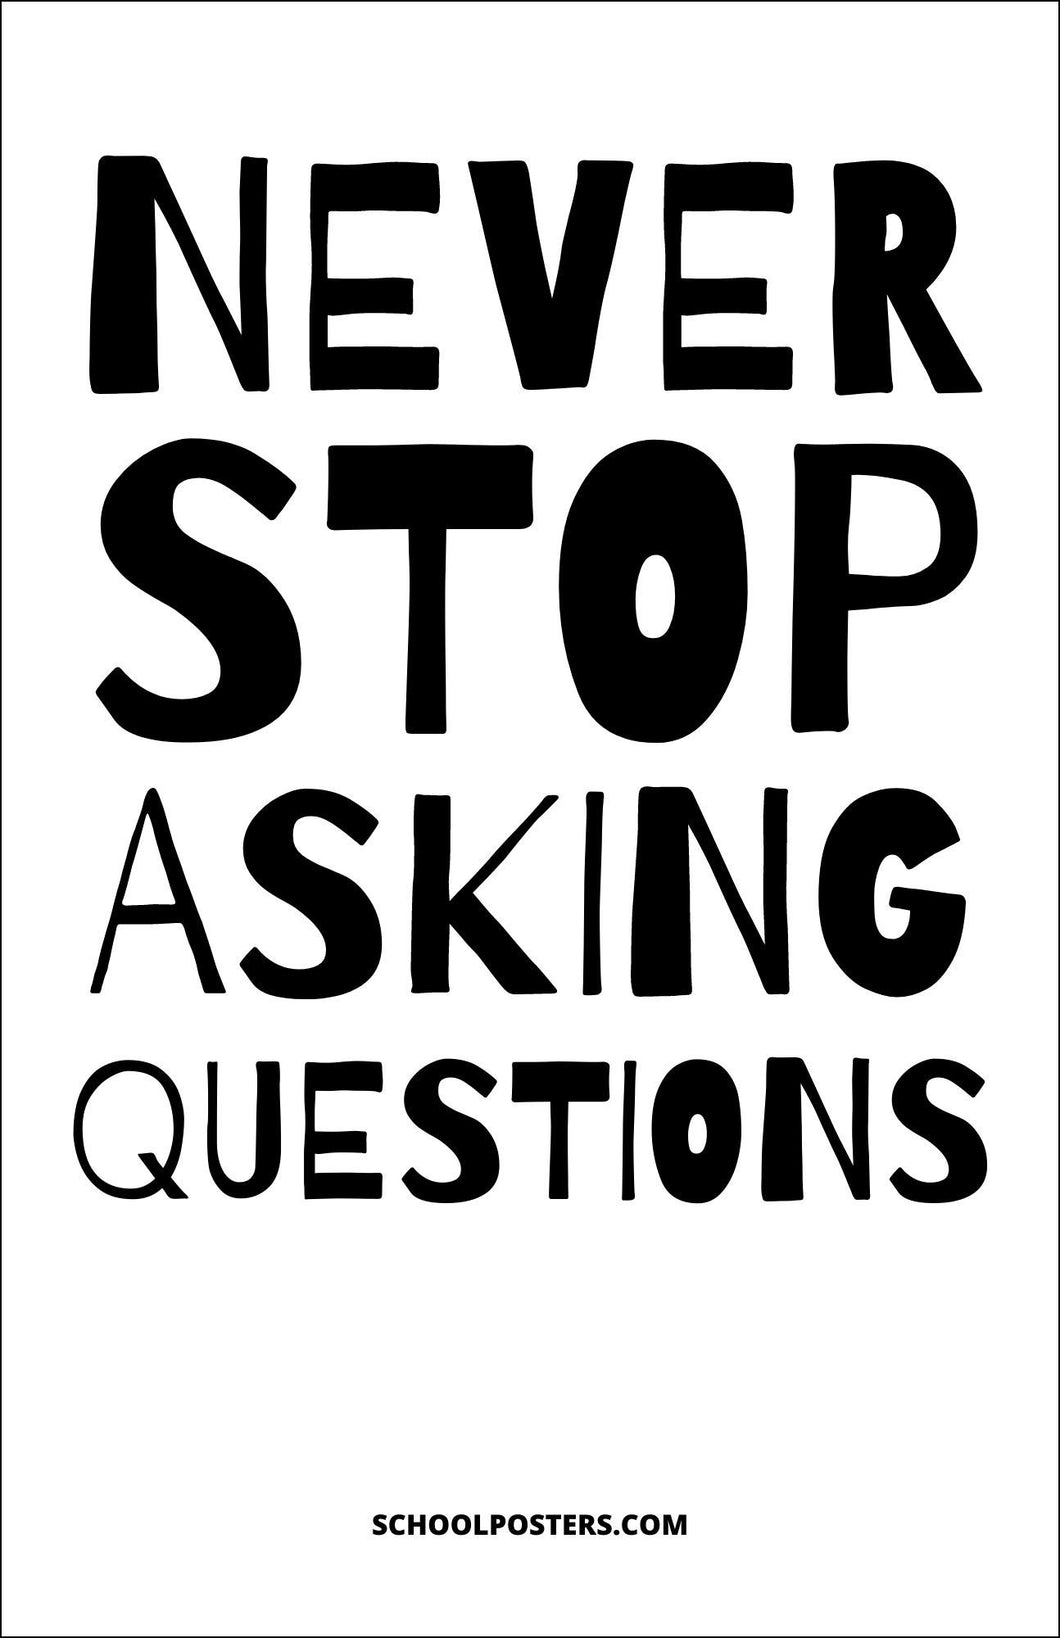 Never Stop Asking Questions Poster